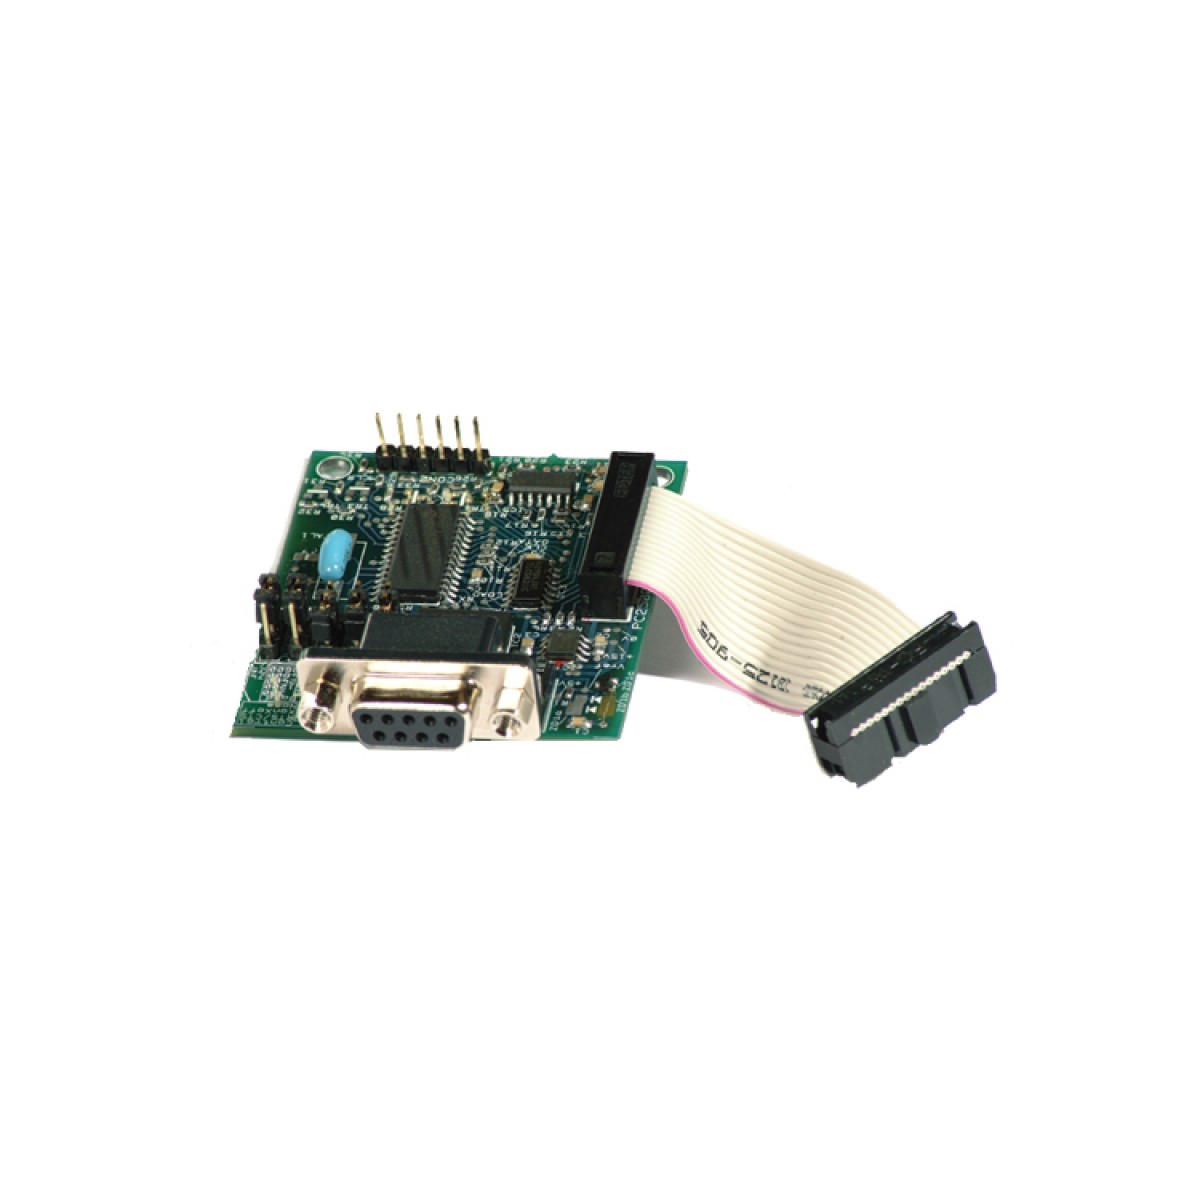 CDI-S100 Optional RS232 Module Card for CX462 Zone Mixer